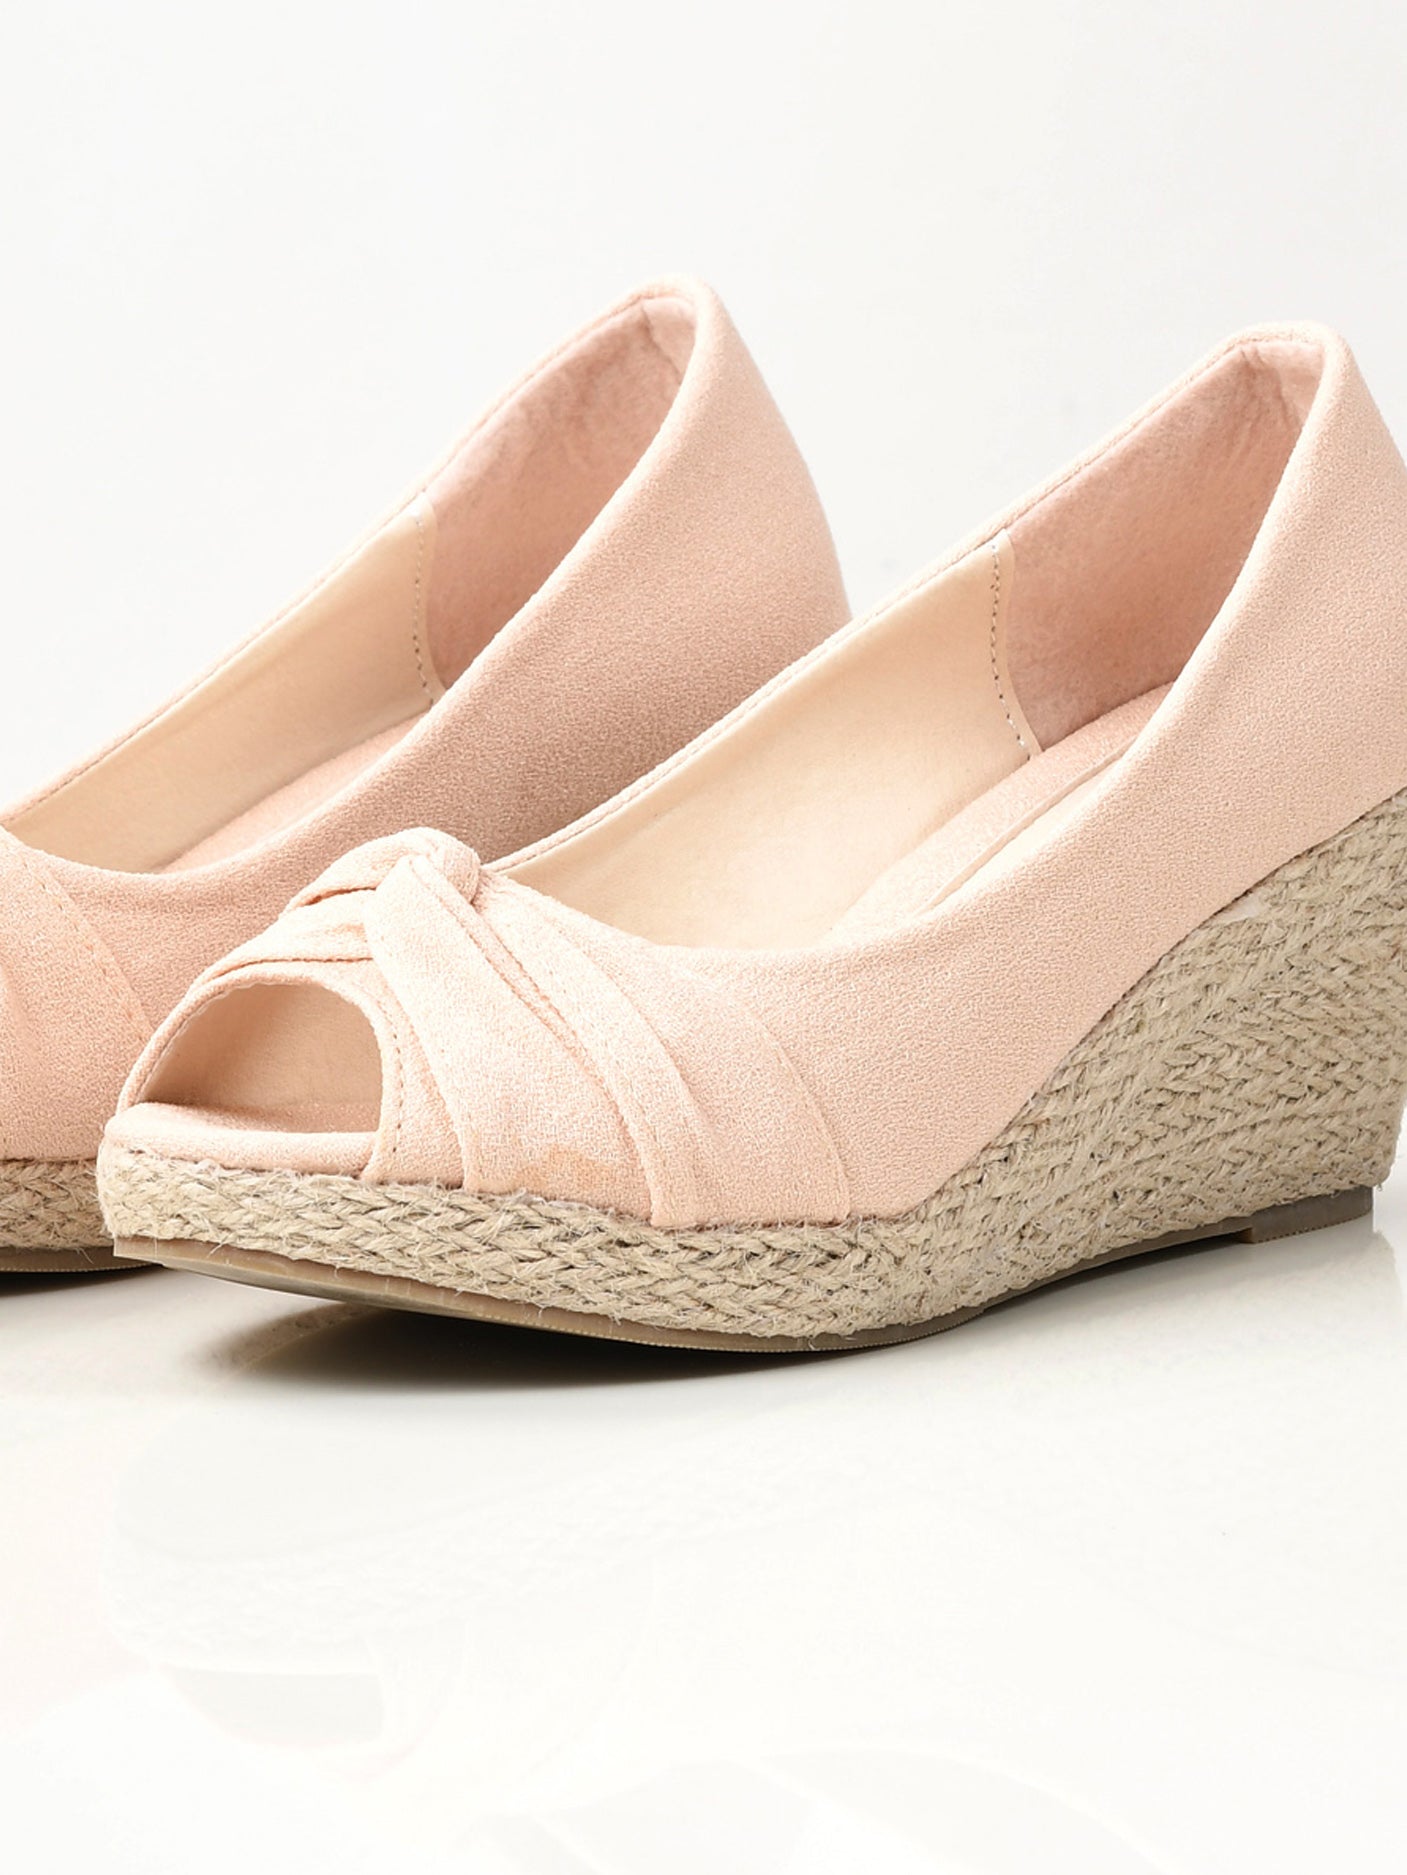 Knotted Weave Wedges - Light Peach